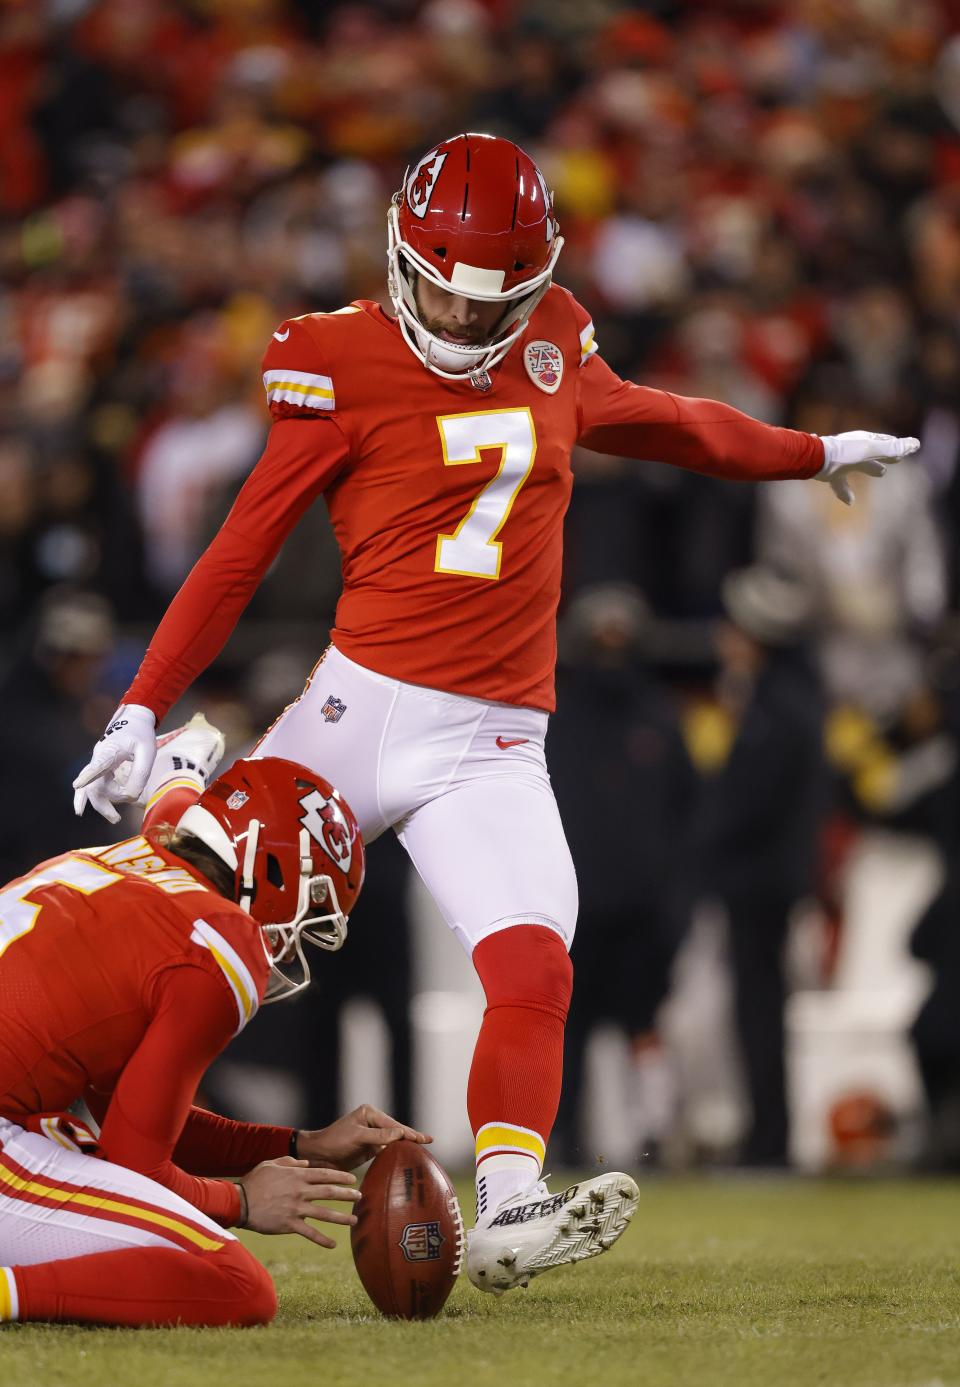 KANSAS CITY, MISSOURI - JANUARY 29: Harrison Butker #7 of the Kansas City Chiefs kicks a field goal against the Cincinnati Bengals during the first quarter in the AFC Championship Game at GEHA Field at Arrowhead Stadium on January 29, 2023 in Kansas City, Missouri. (Photo by David Eulitt/Getty Images)